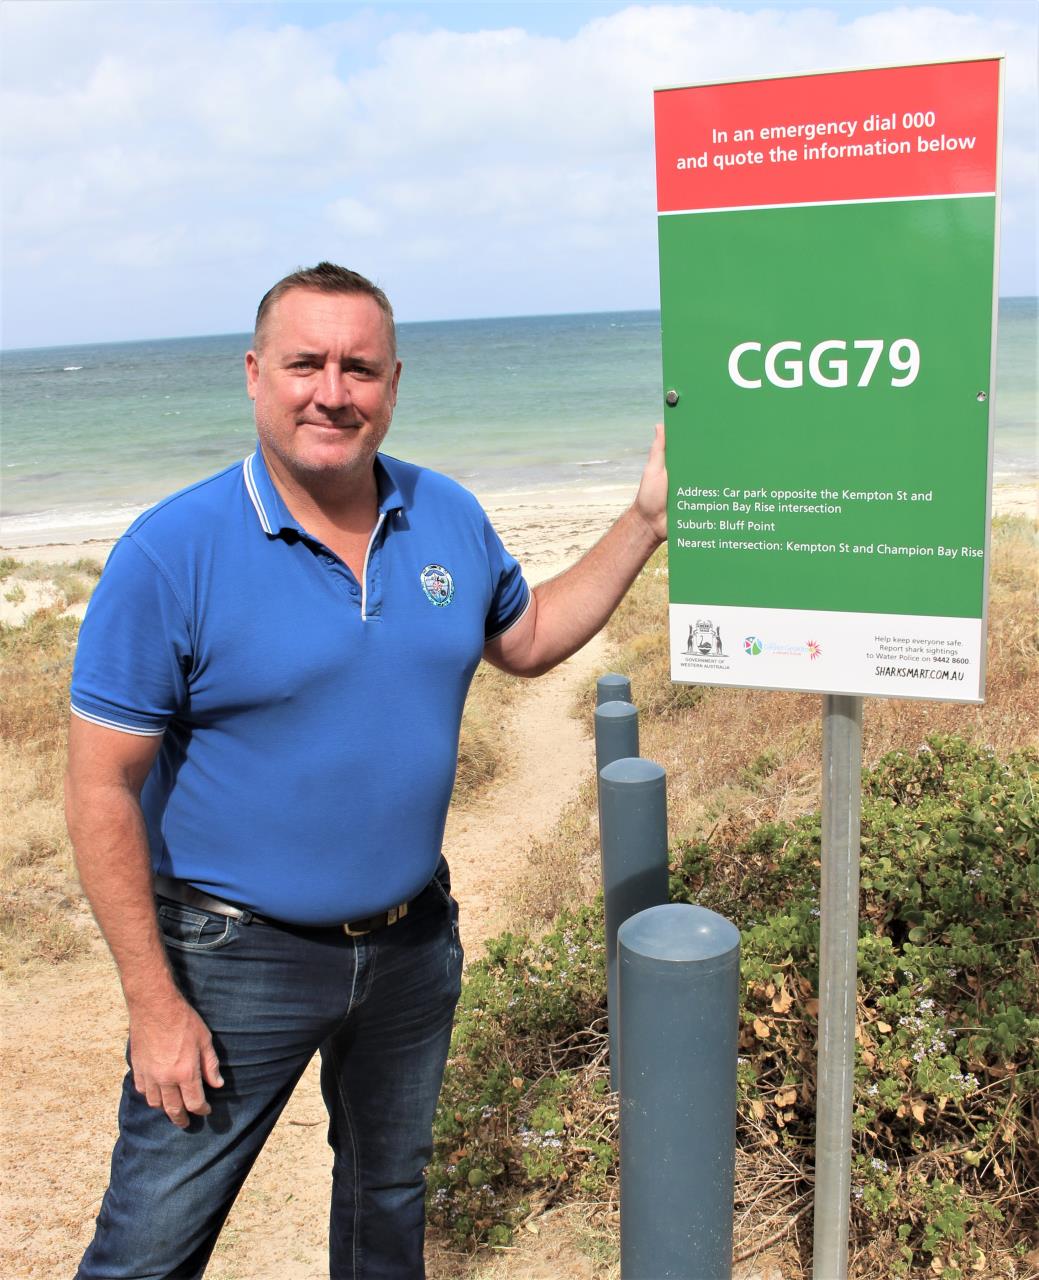 Beach Emergency Number signs boost safety